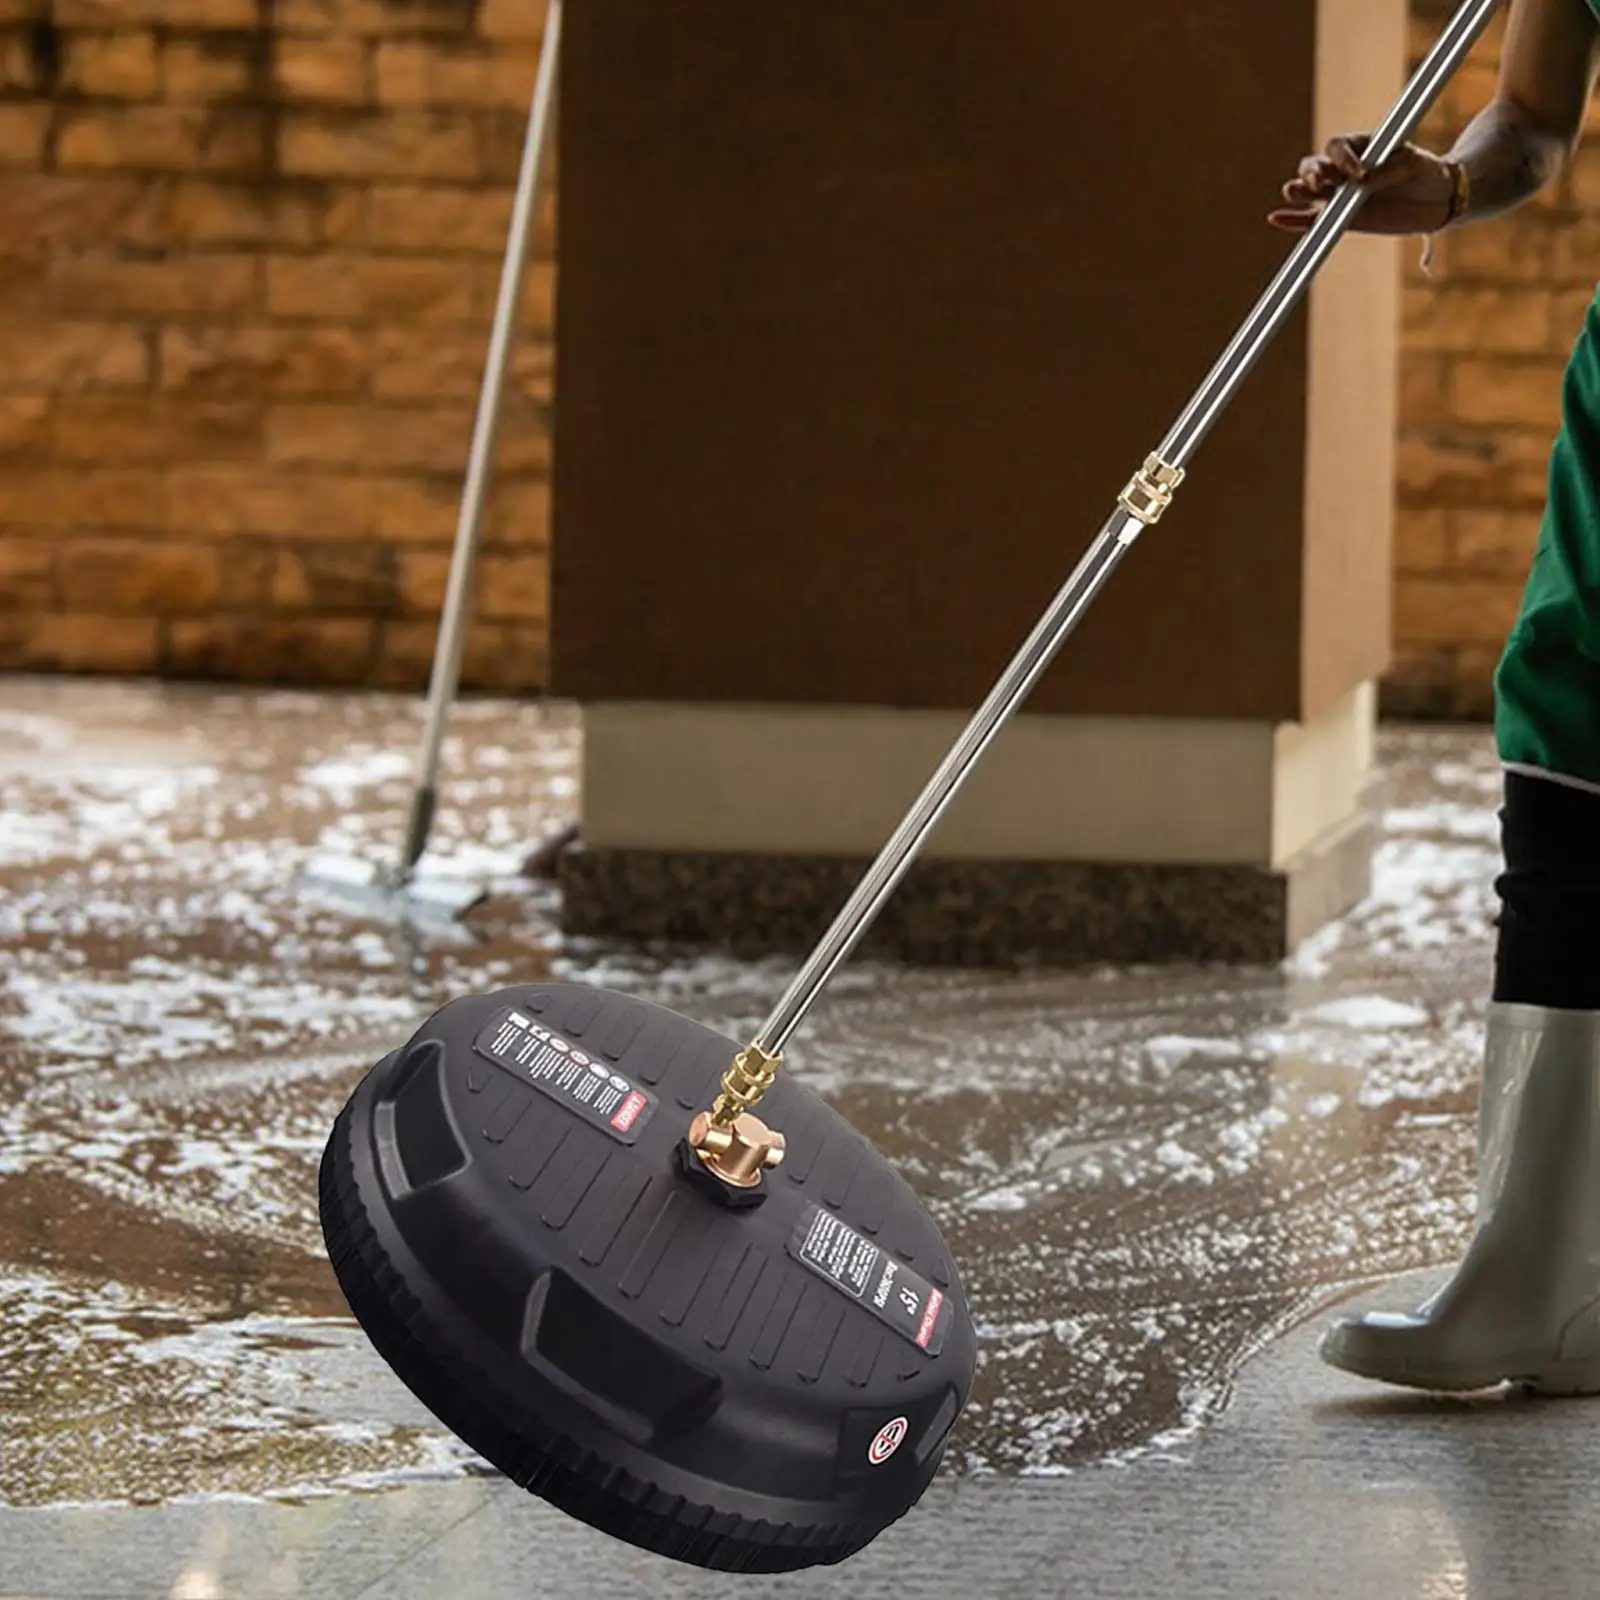 Pressure Washer Surface Cleaner Pressure Washing for Cleaning Outdoors Patio